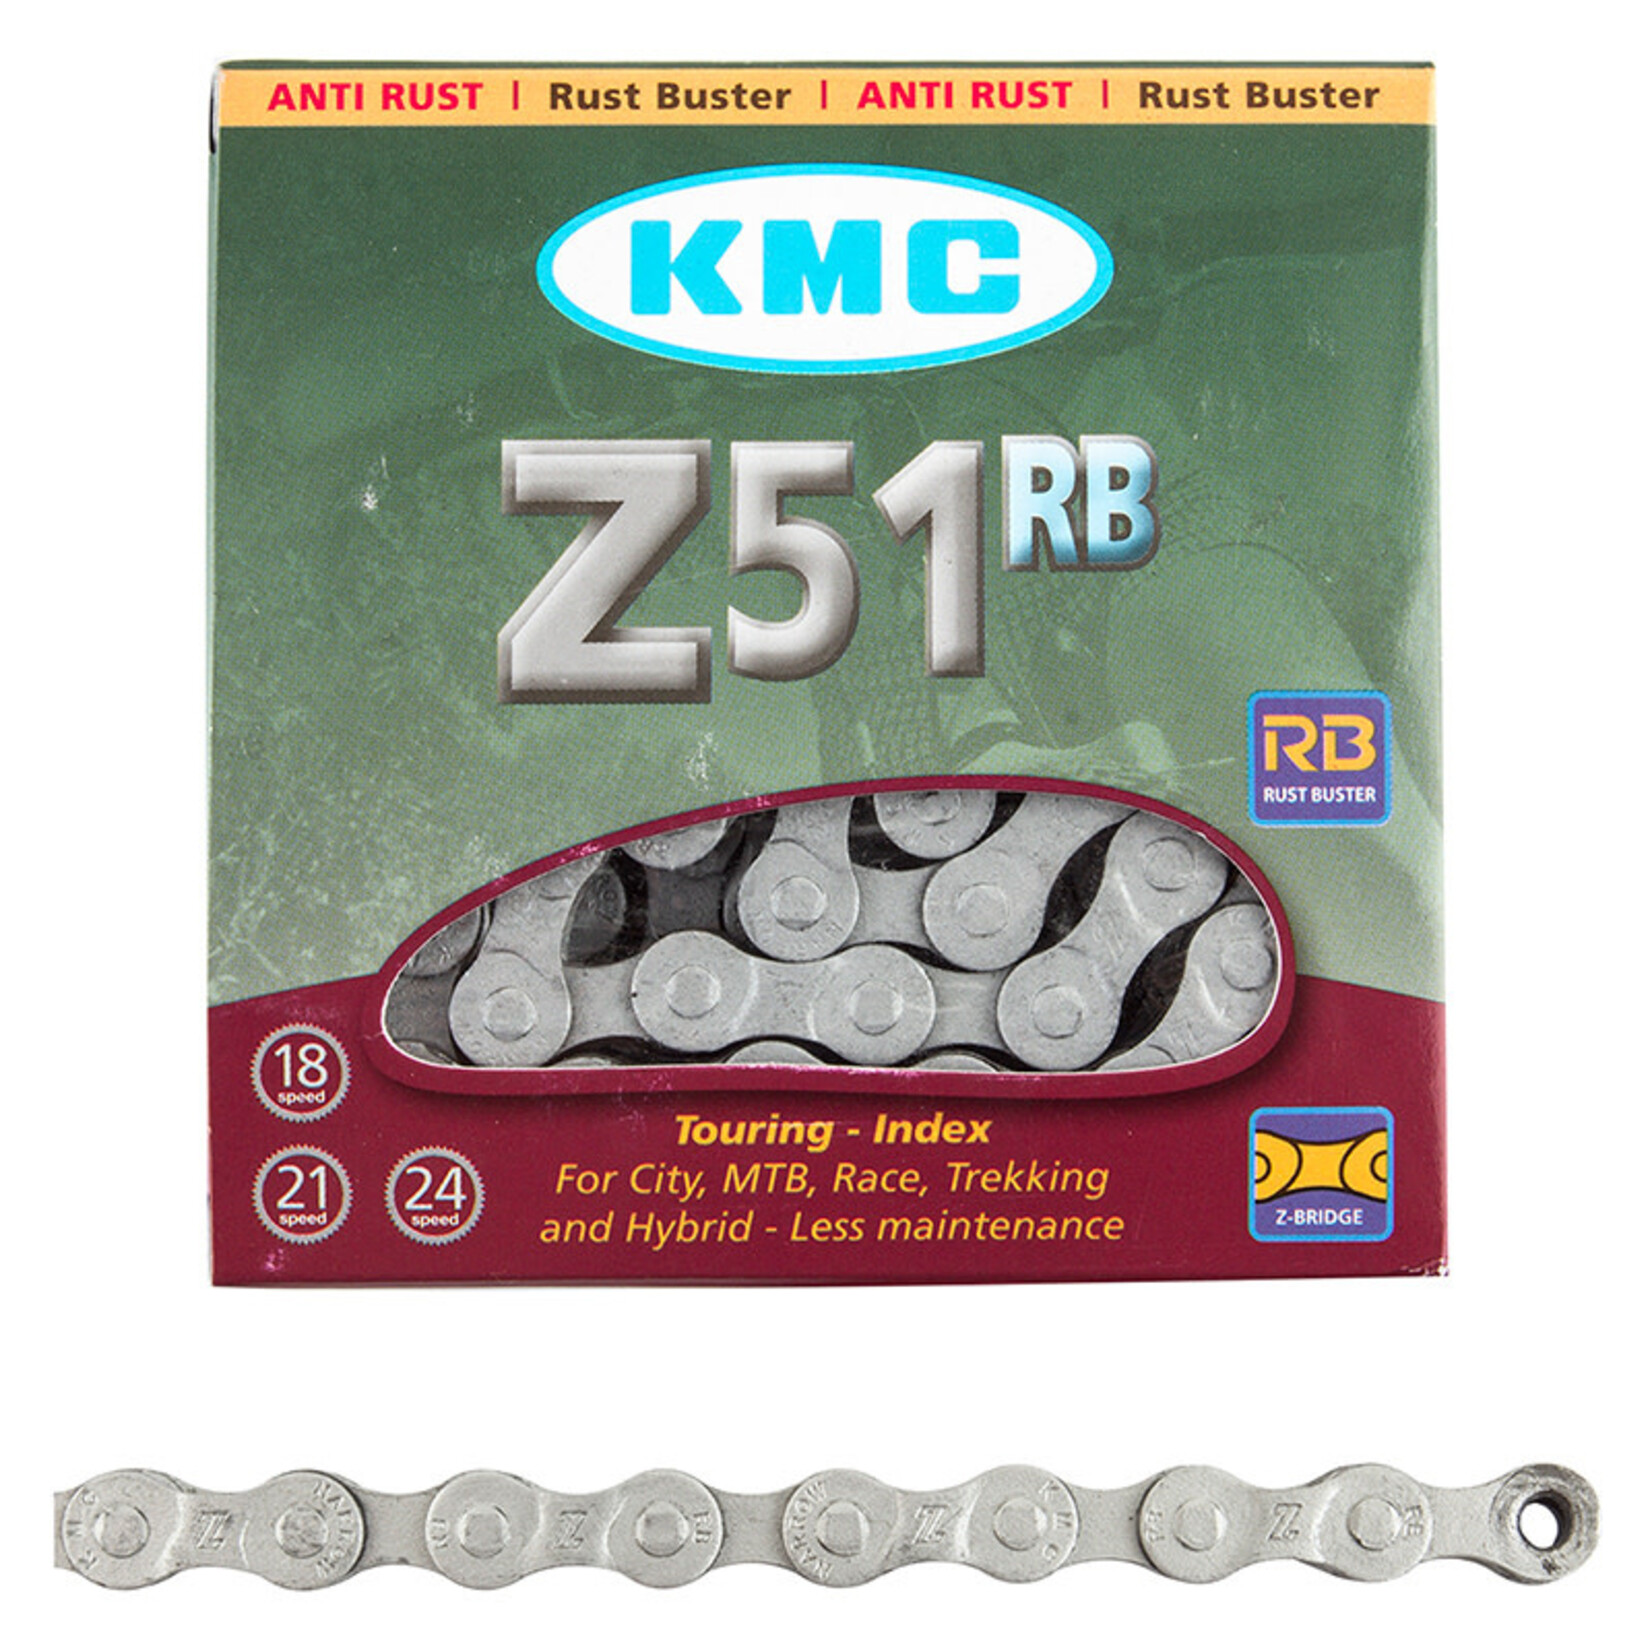 KMC KMC - Z51RB Rust-Buster, 6/7/8 Speed, 116L